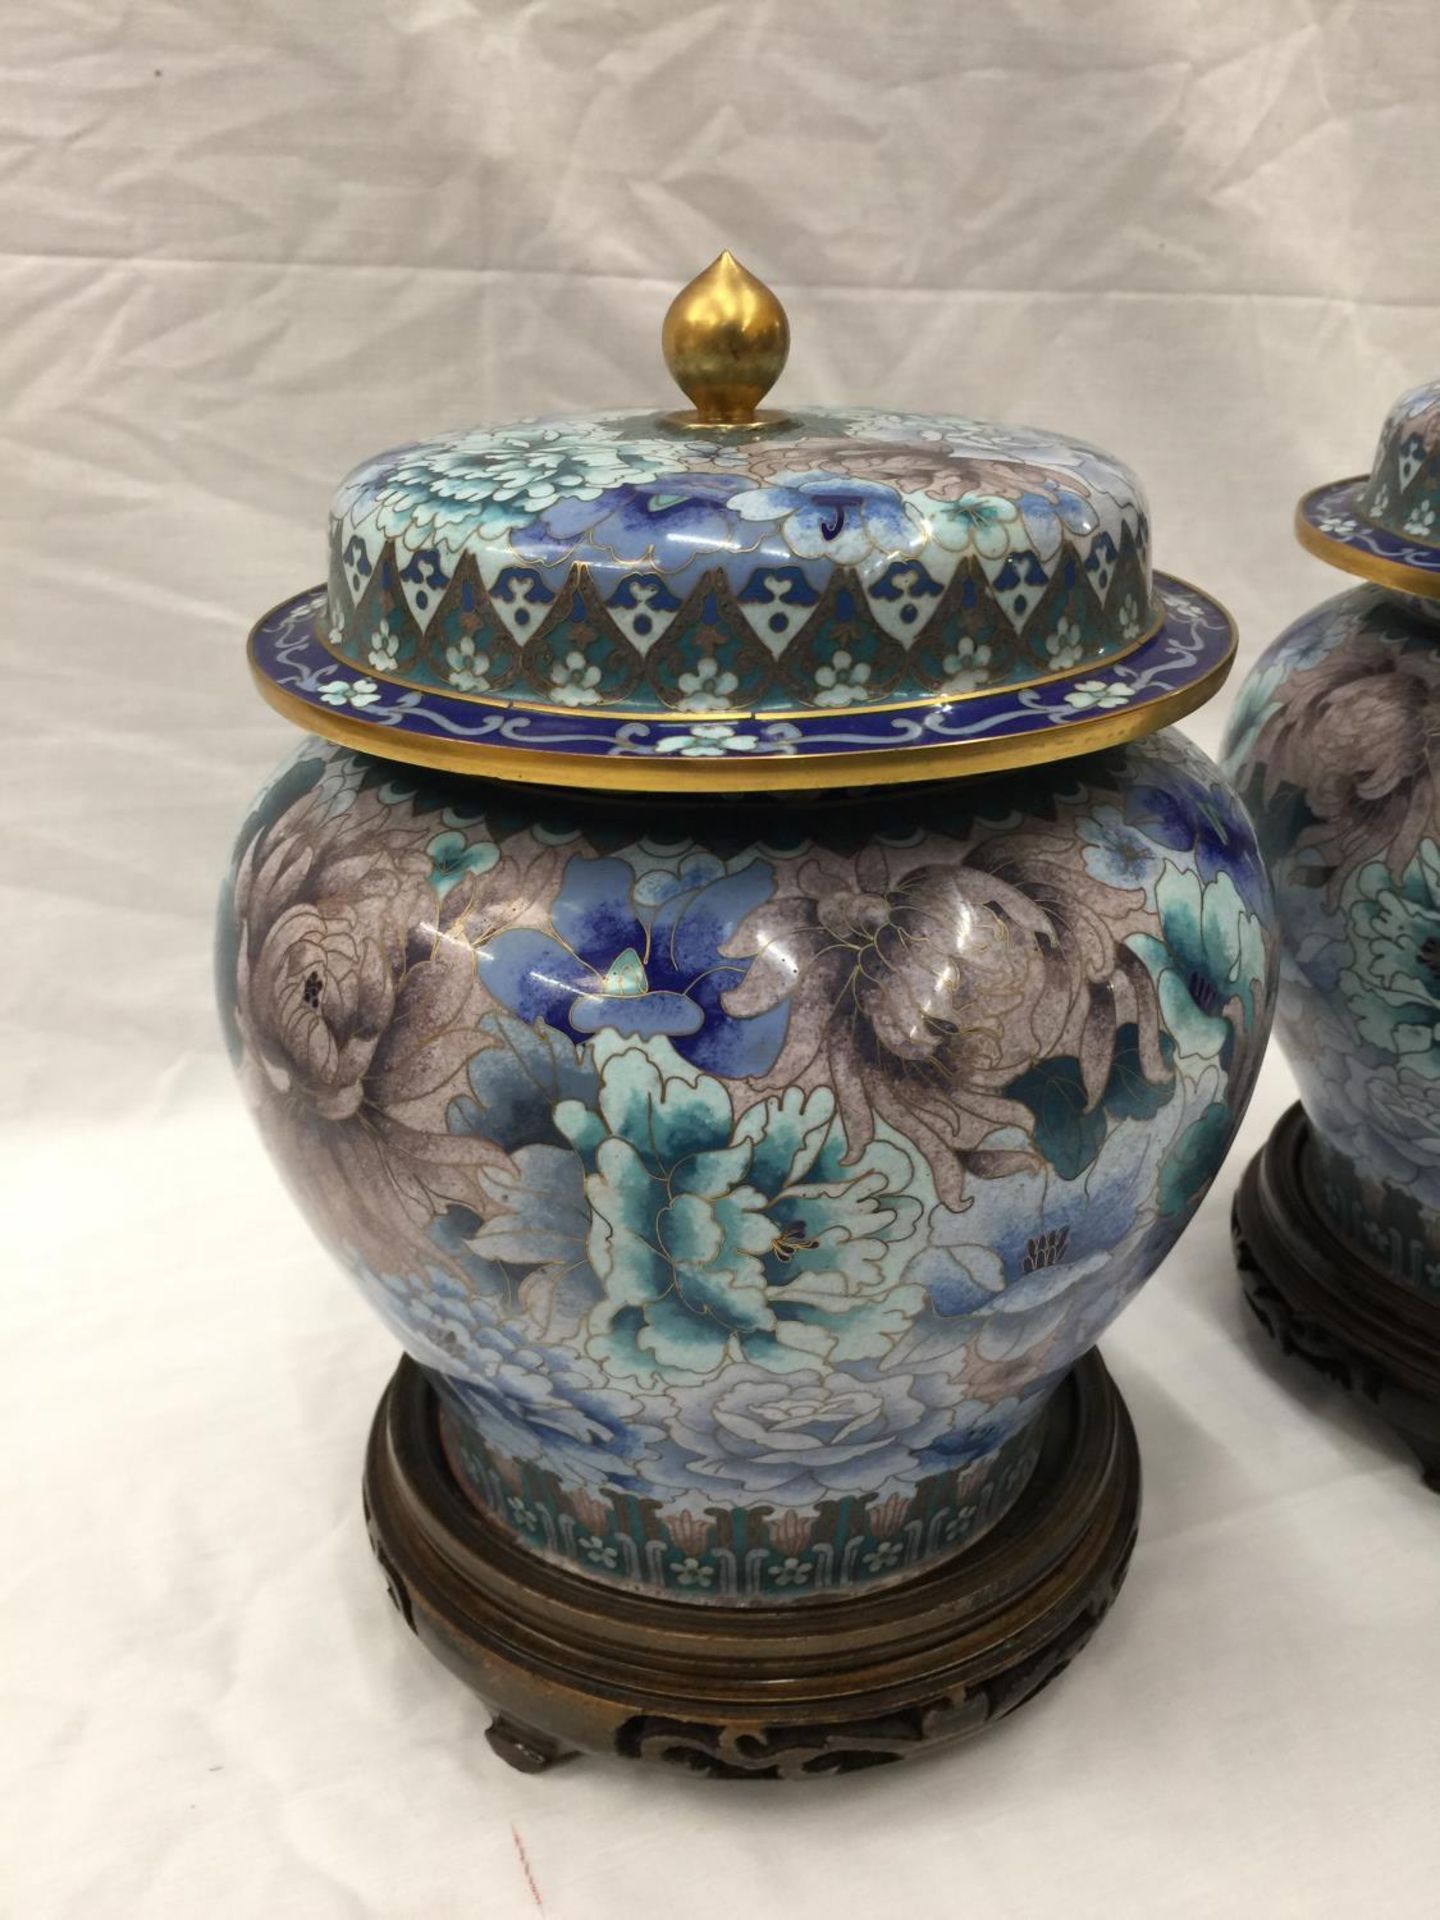 A LARGE PAIR OF ORIENTAL STYLE CLOISONNE PAINTED METAL VASES WITH GILT OUTLINING H: 31CM - Image 3 of 8